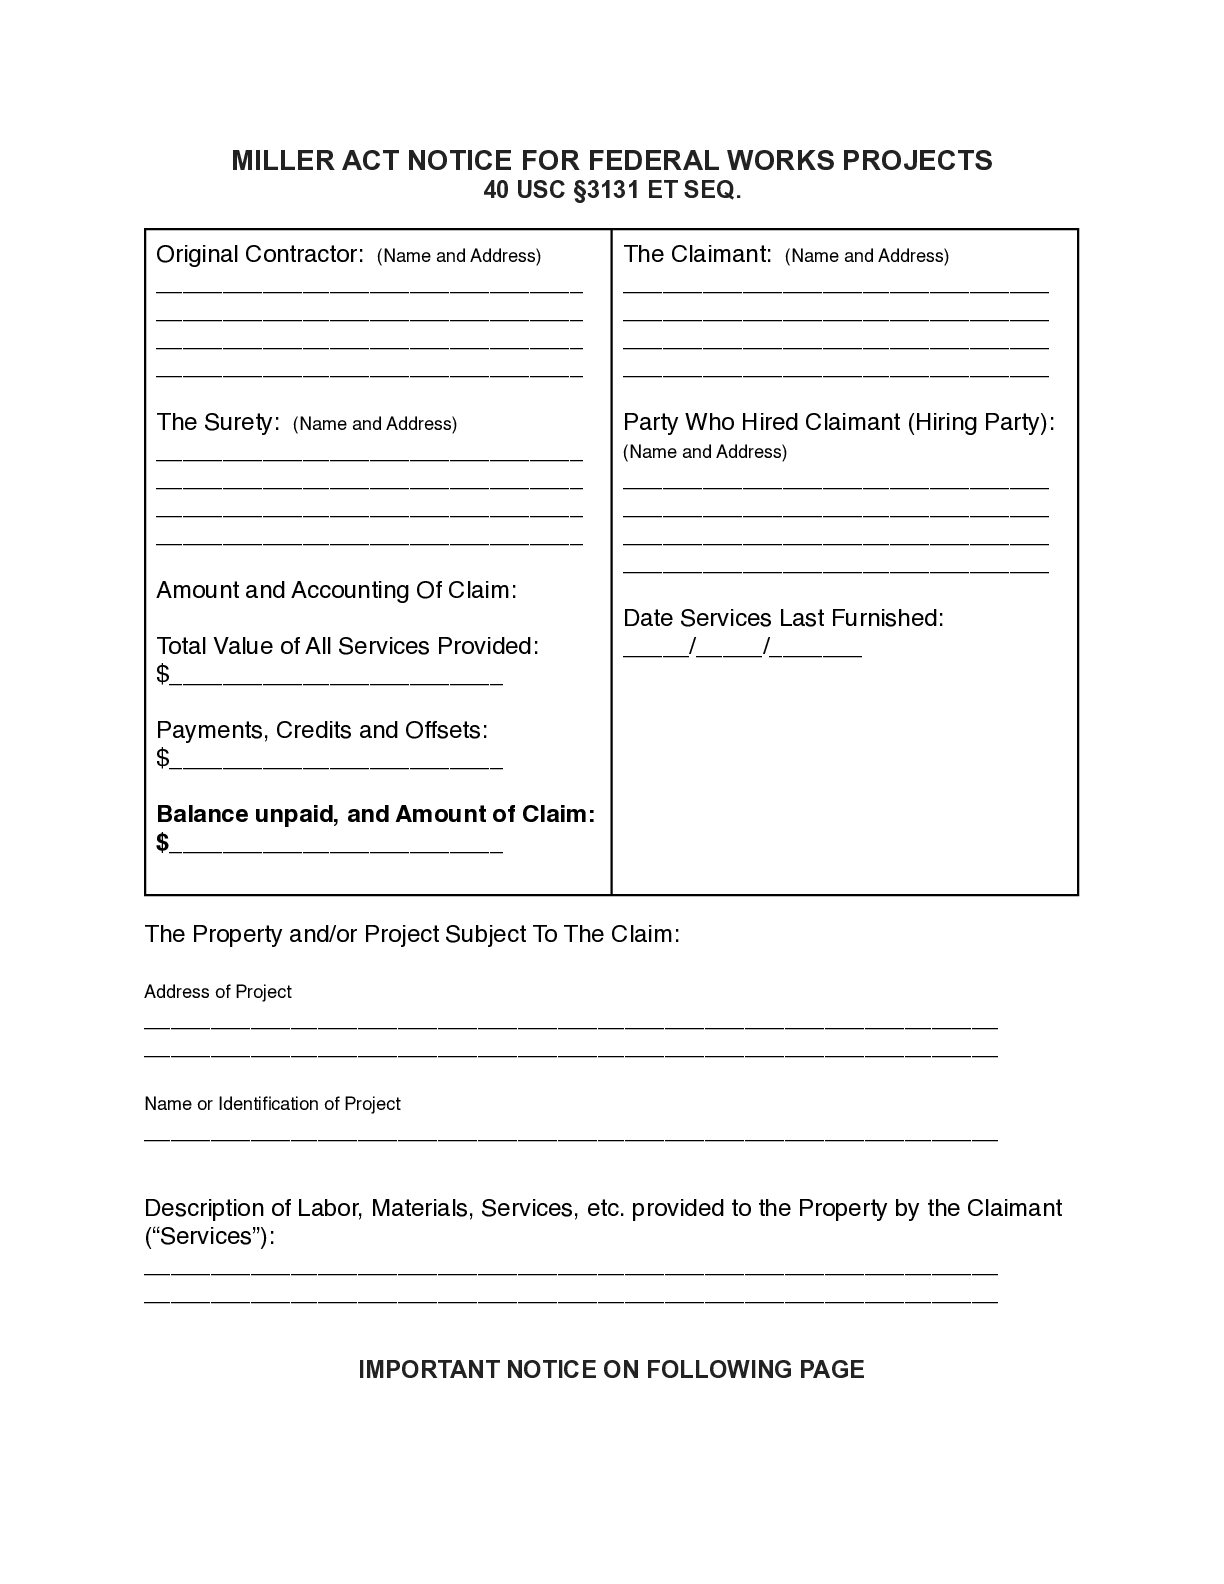 Miller Act Claim Form - free from